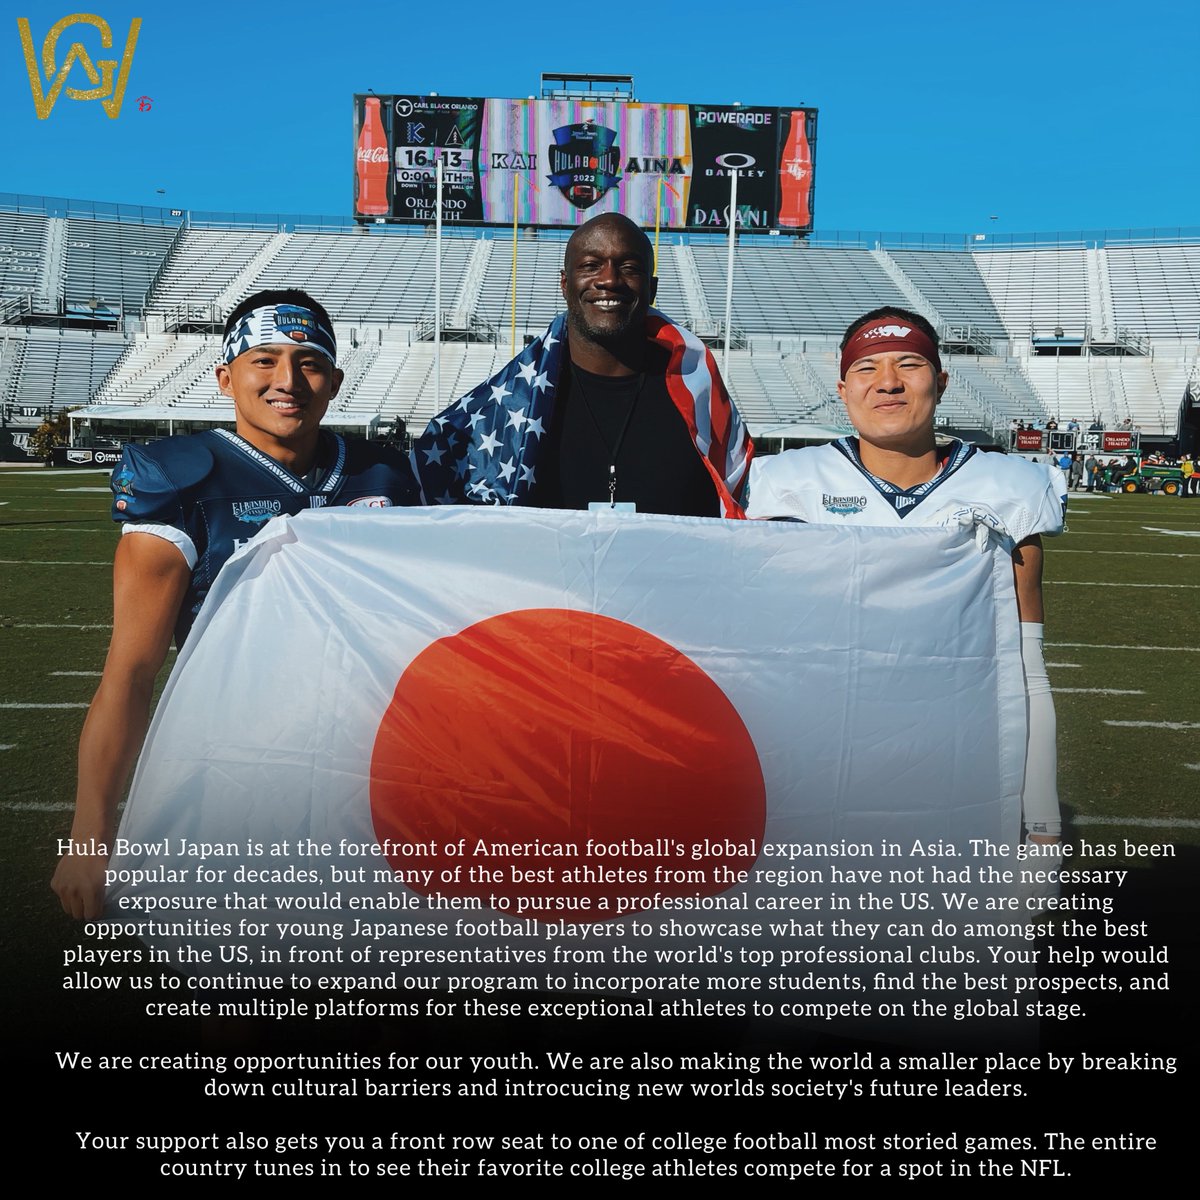 Hula Bowl Japan is at the forefront of American football's global expansion in Asia.

#wakamurafoundation
#hulabowl
#hulabowljapan
#football 🇺🇸🤝🏽🇯🇵